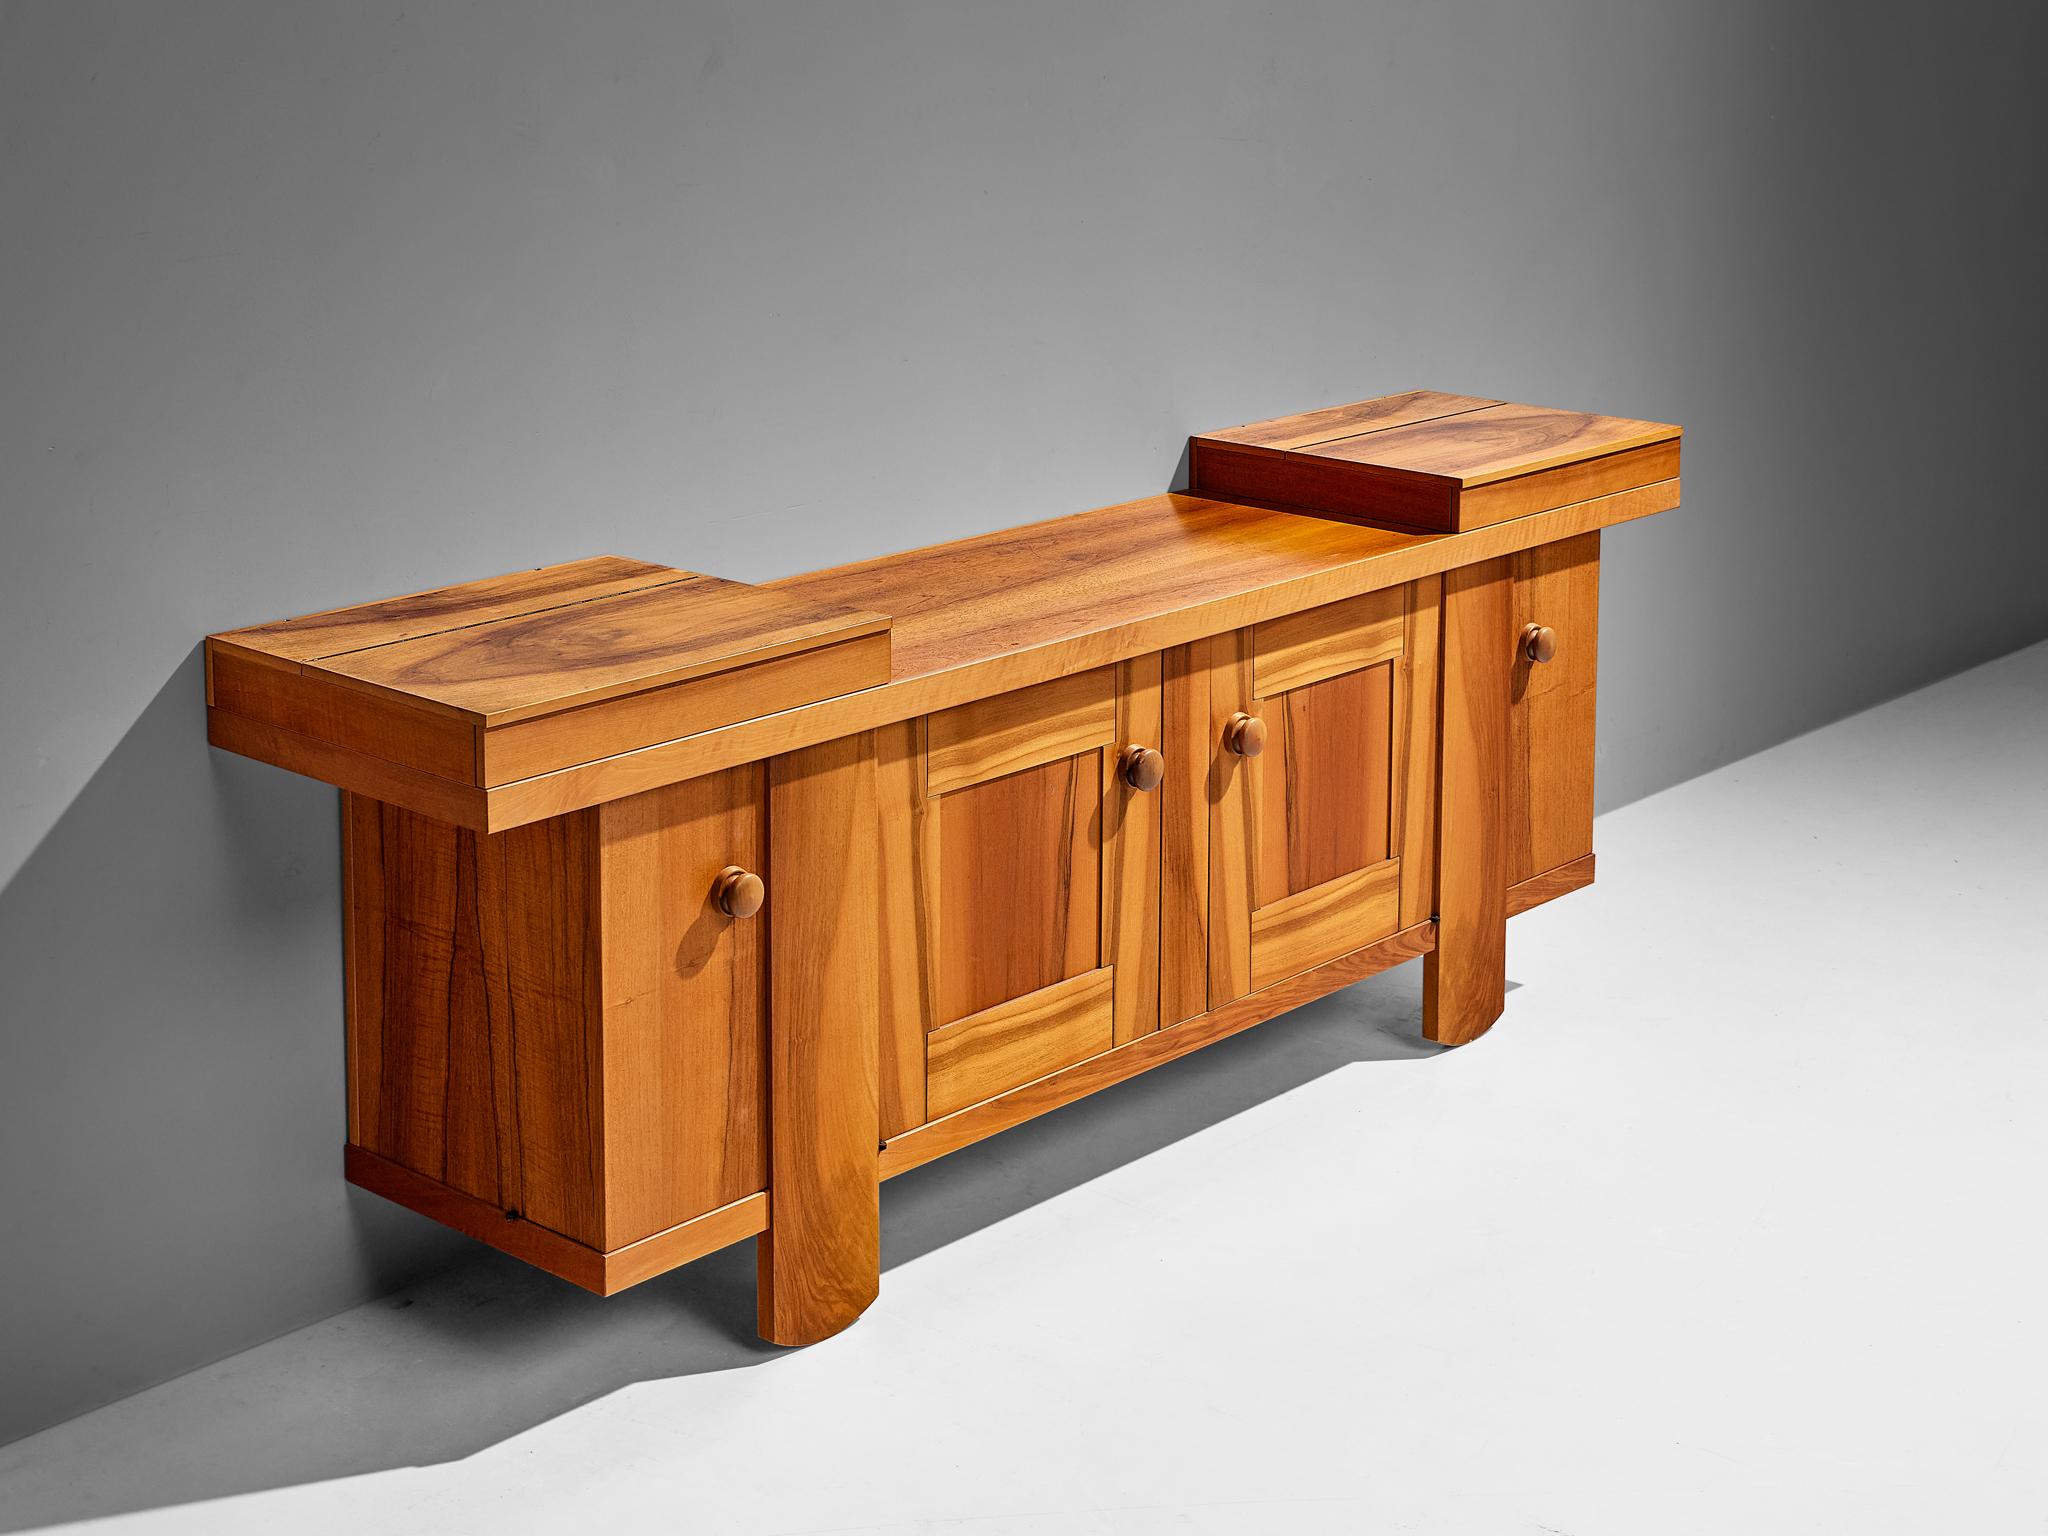 Silvio Coppola for Bernini, sideboard, walnut, Italy, 1960s

This impressive sideboard or credenza was designed by Silvio Coppola. It is well-structured with different compartments to store your belongings. Two doors in the middle and two corner